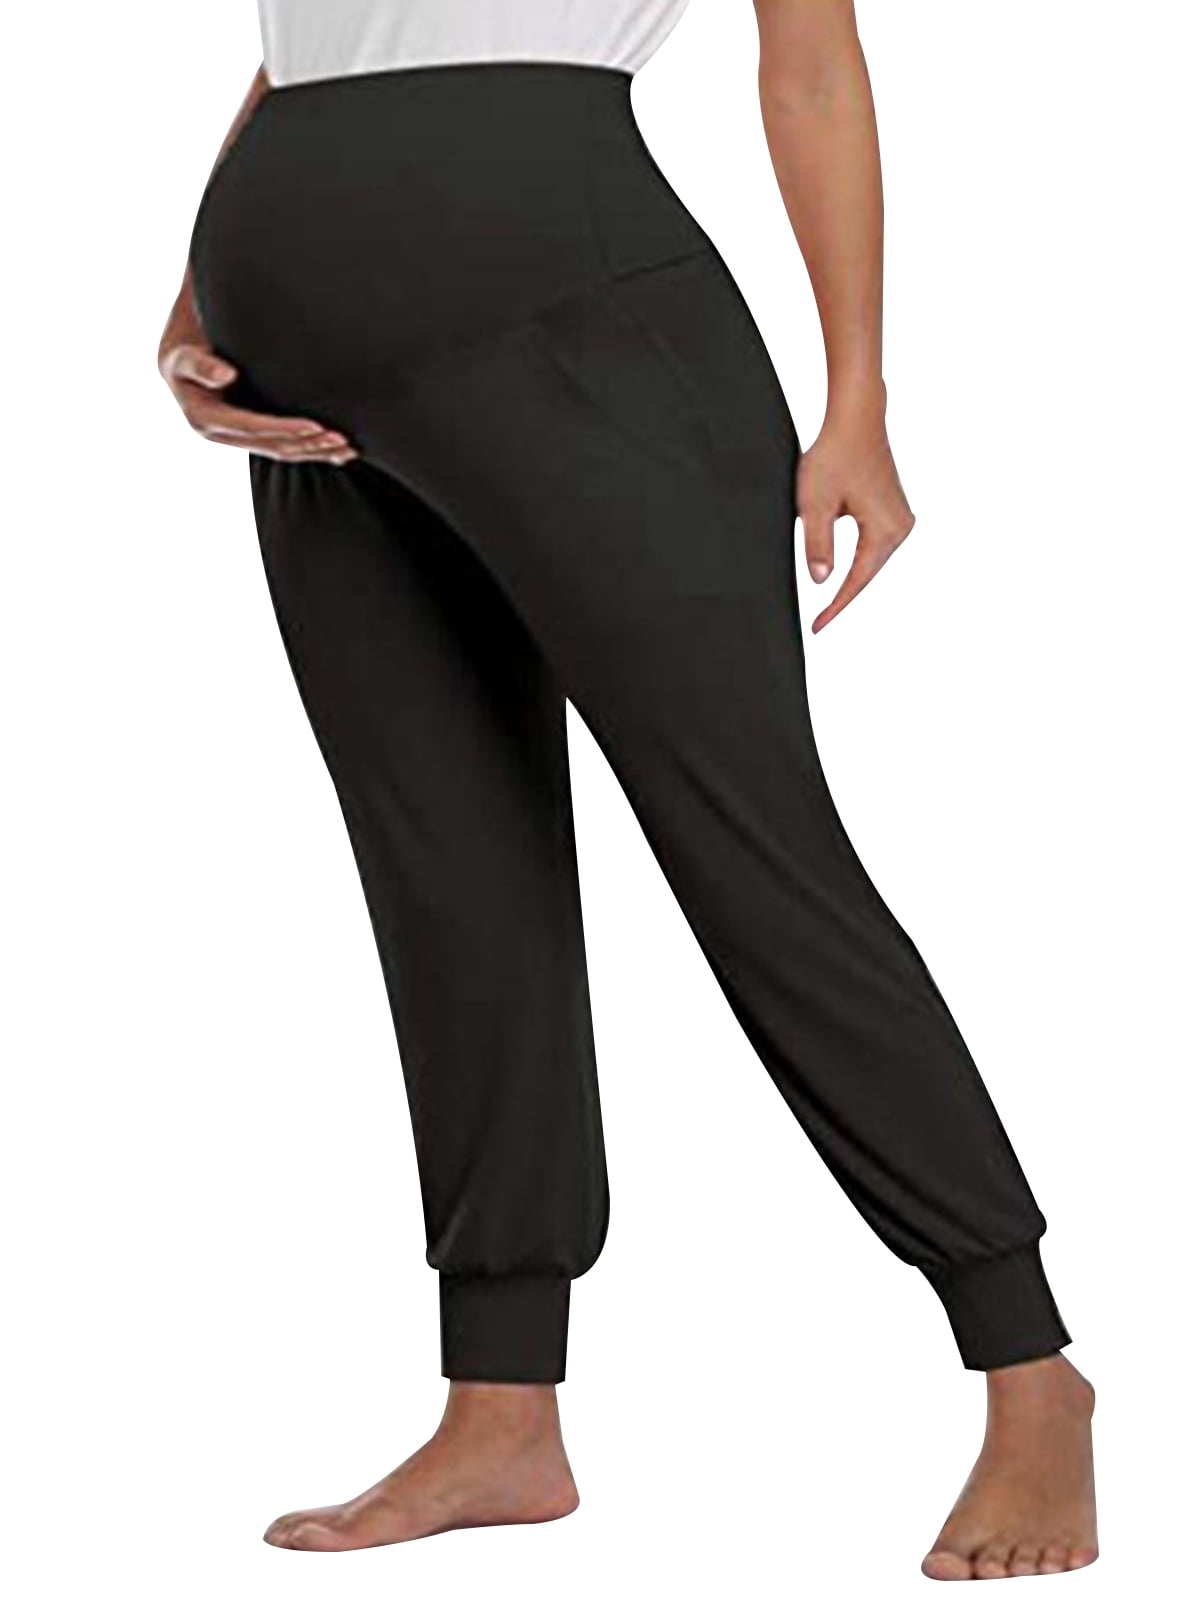 Women/'s Maternity Jogger Over The Belly Pregnancy Pant Lounge//Pajama//Pj//Yoga Sweatpant